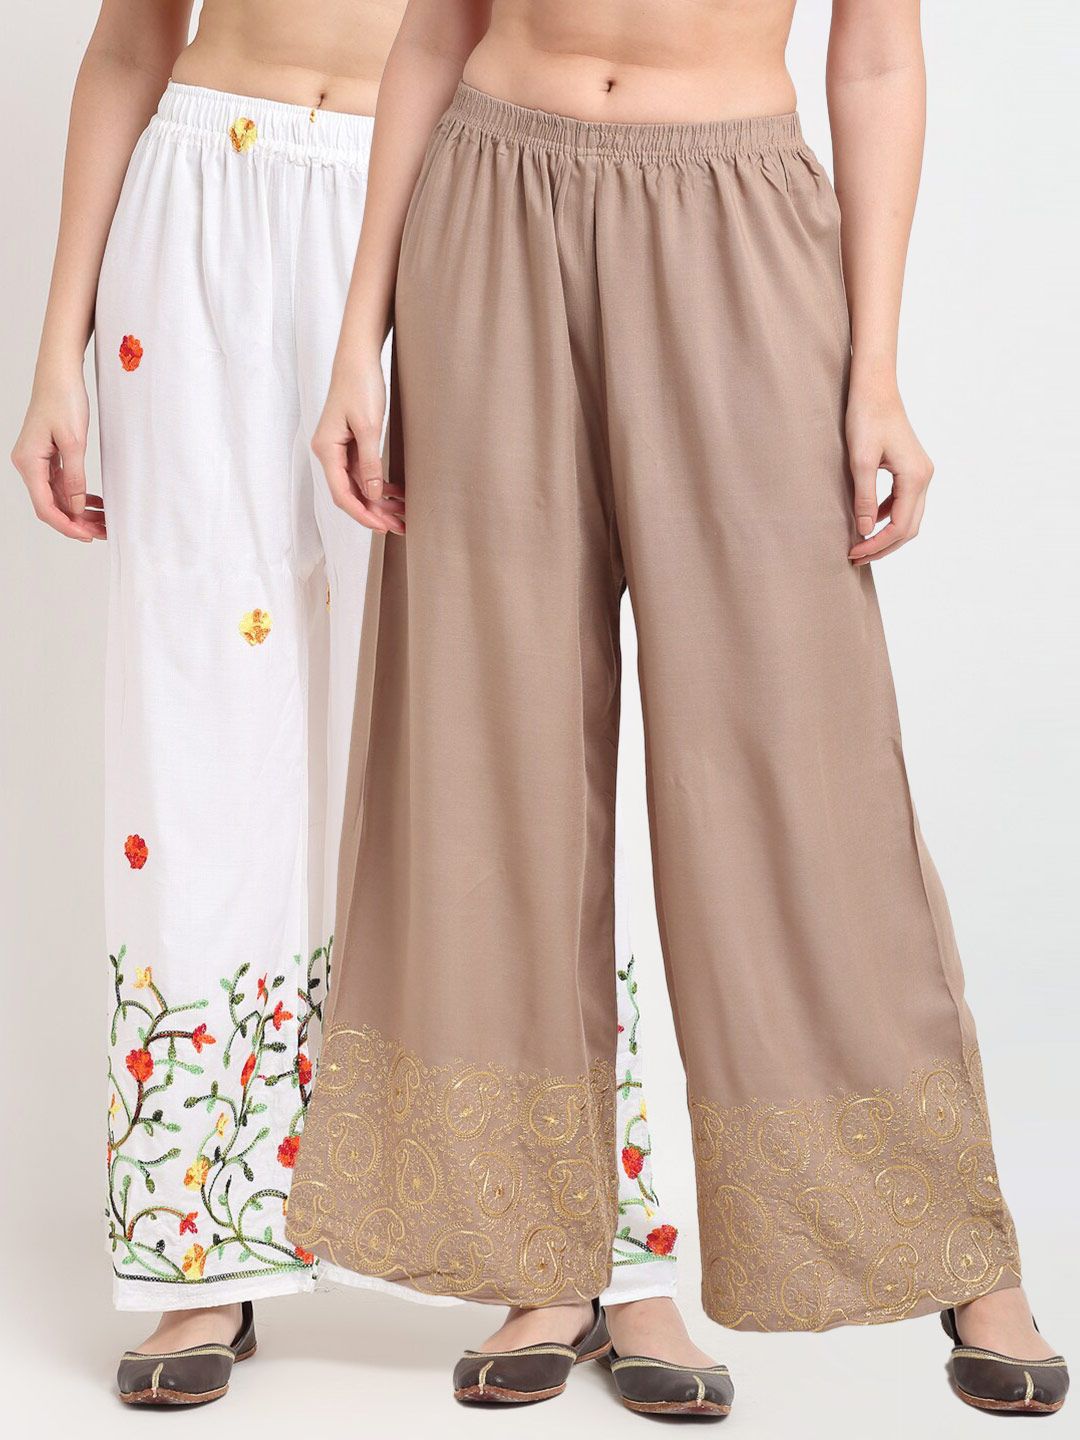 TAG 7 Women White & Beige Pack of 2 Floral Embroidered Flared Palazzos Price in India